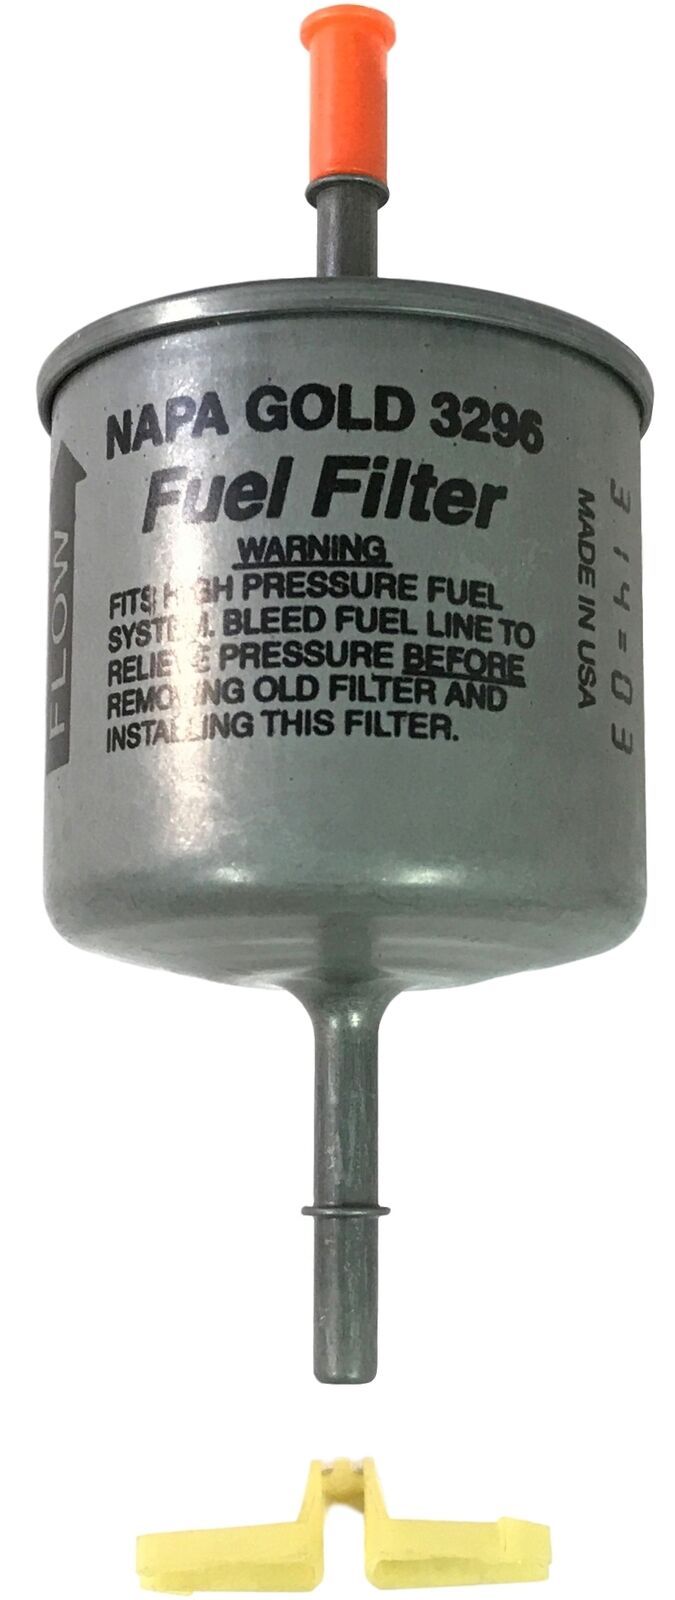 Primary image for Napa 3296 Fuel Filter